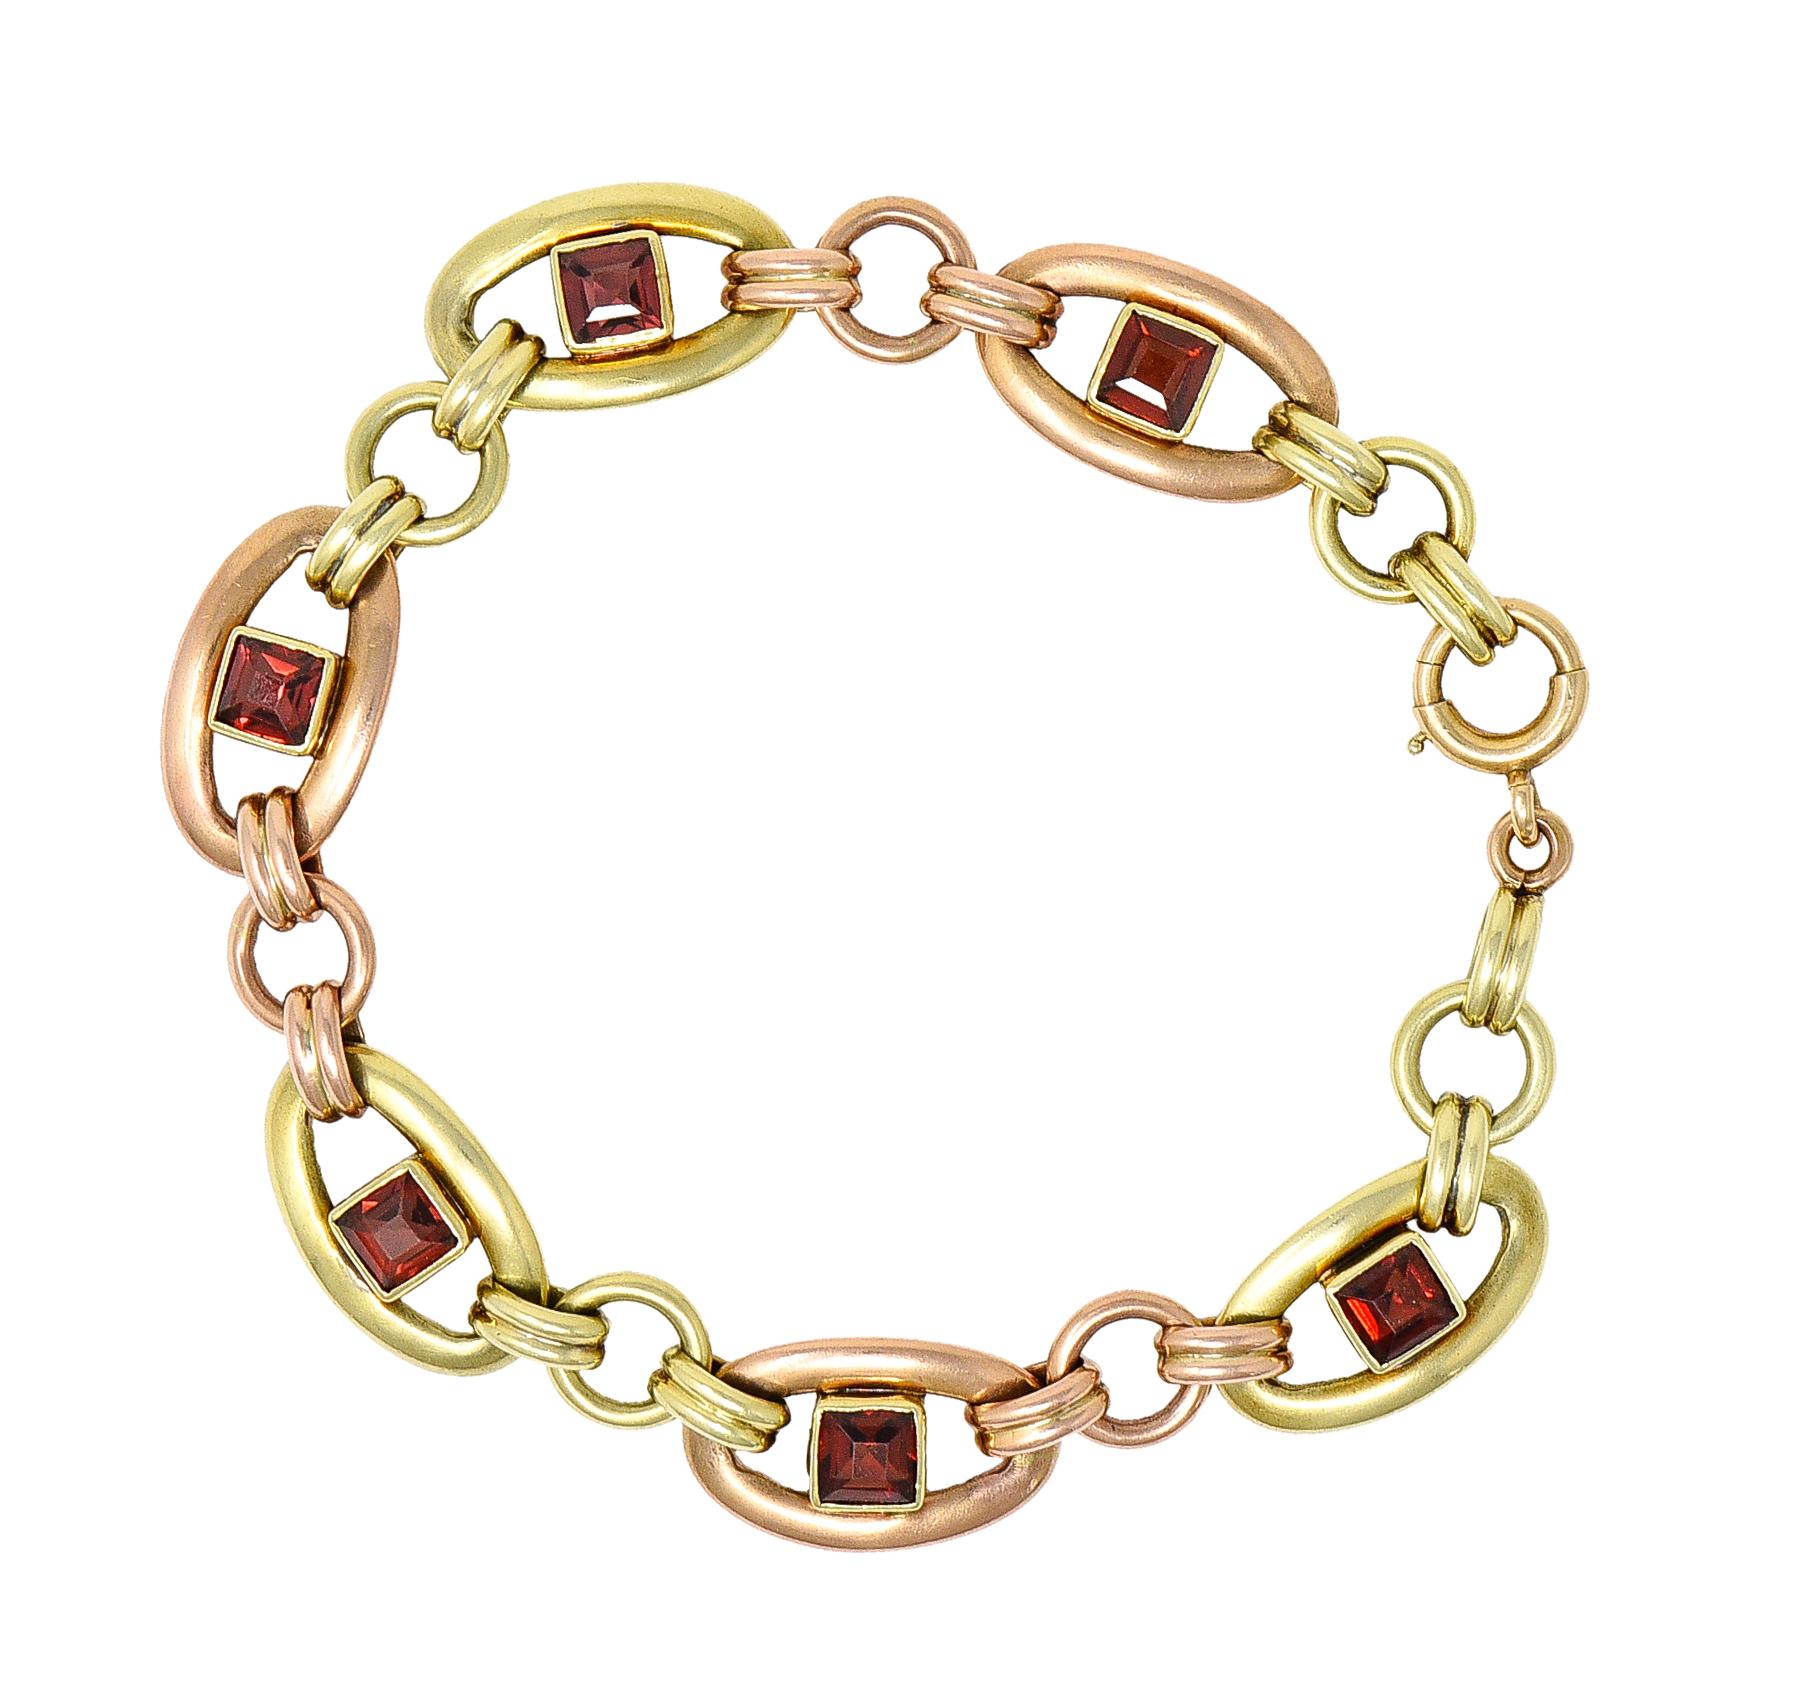 Link bracelet is comprised of oval links - green and rose gold alternating. With ribbed and circular spacer links. Featuring bezel set square cut garnets measuring approximately 4.5 x 4.5 mm. Eye clean with orangey red to purplish red color - medium